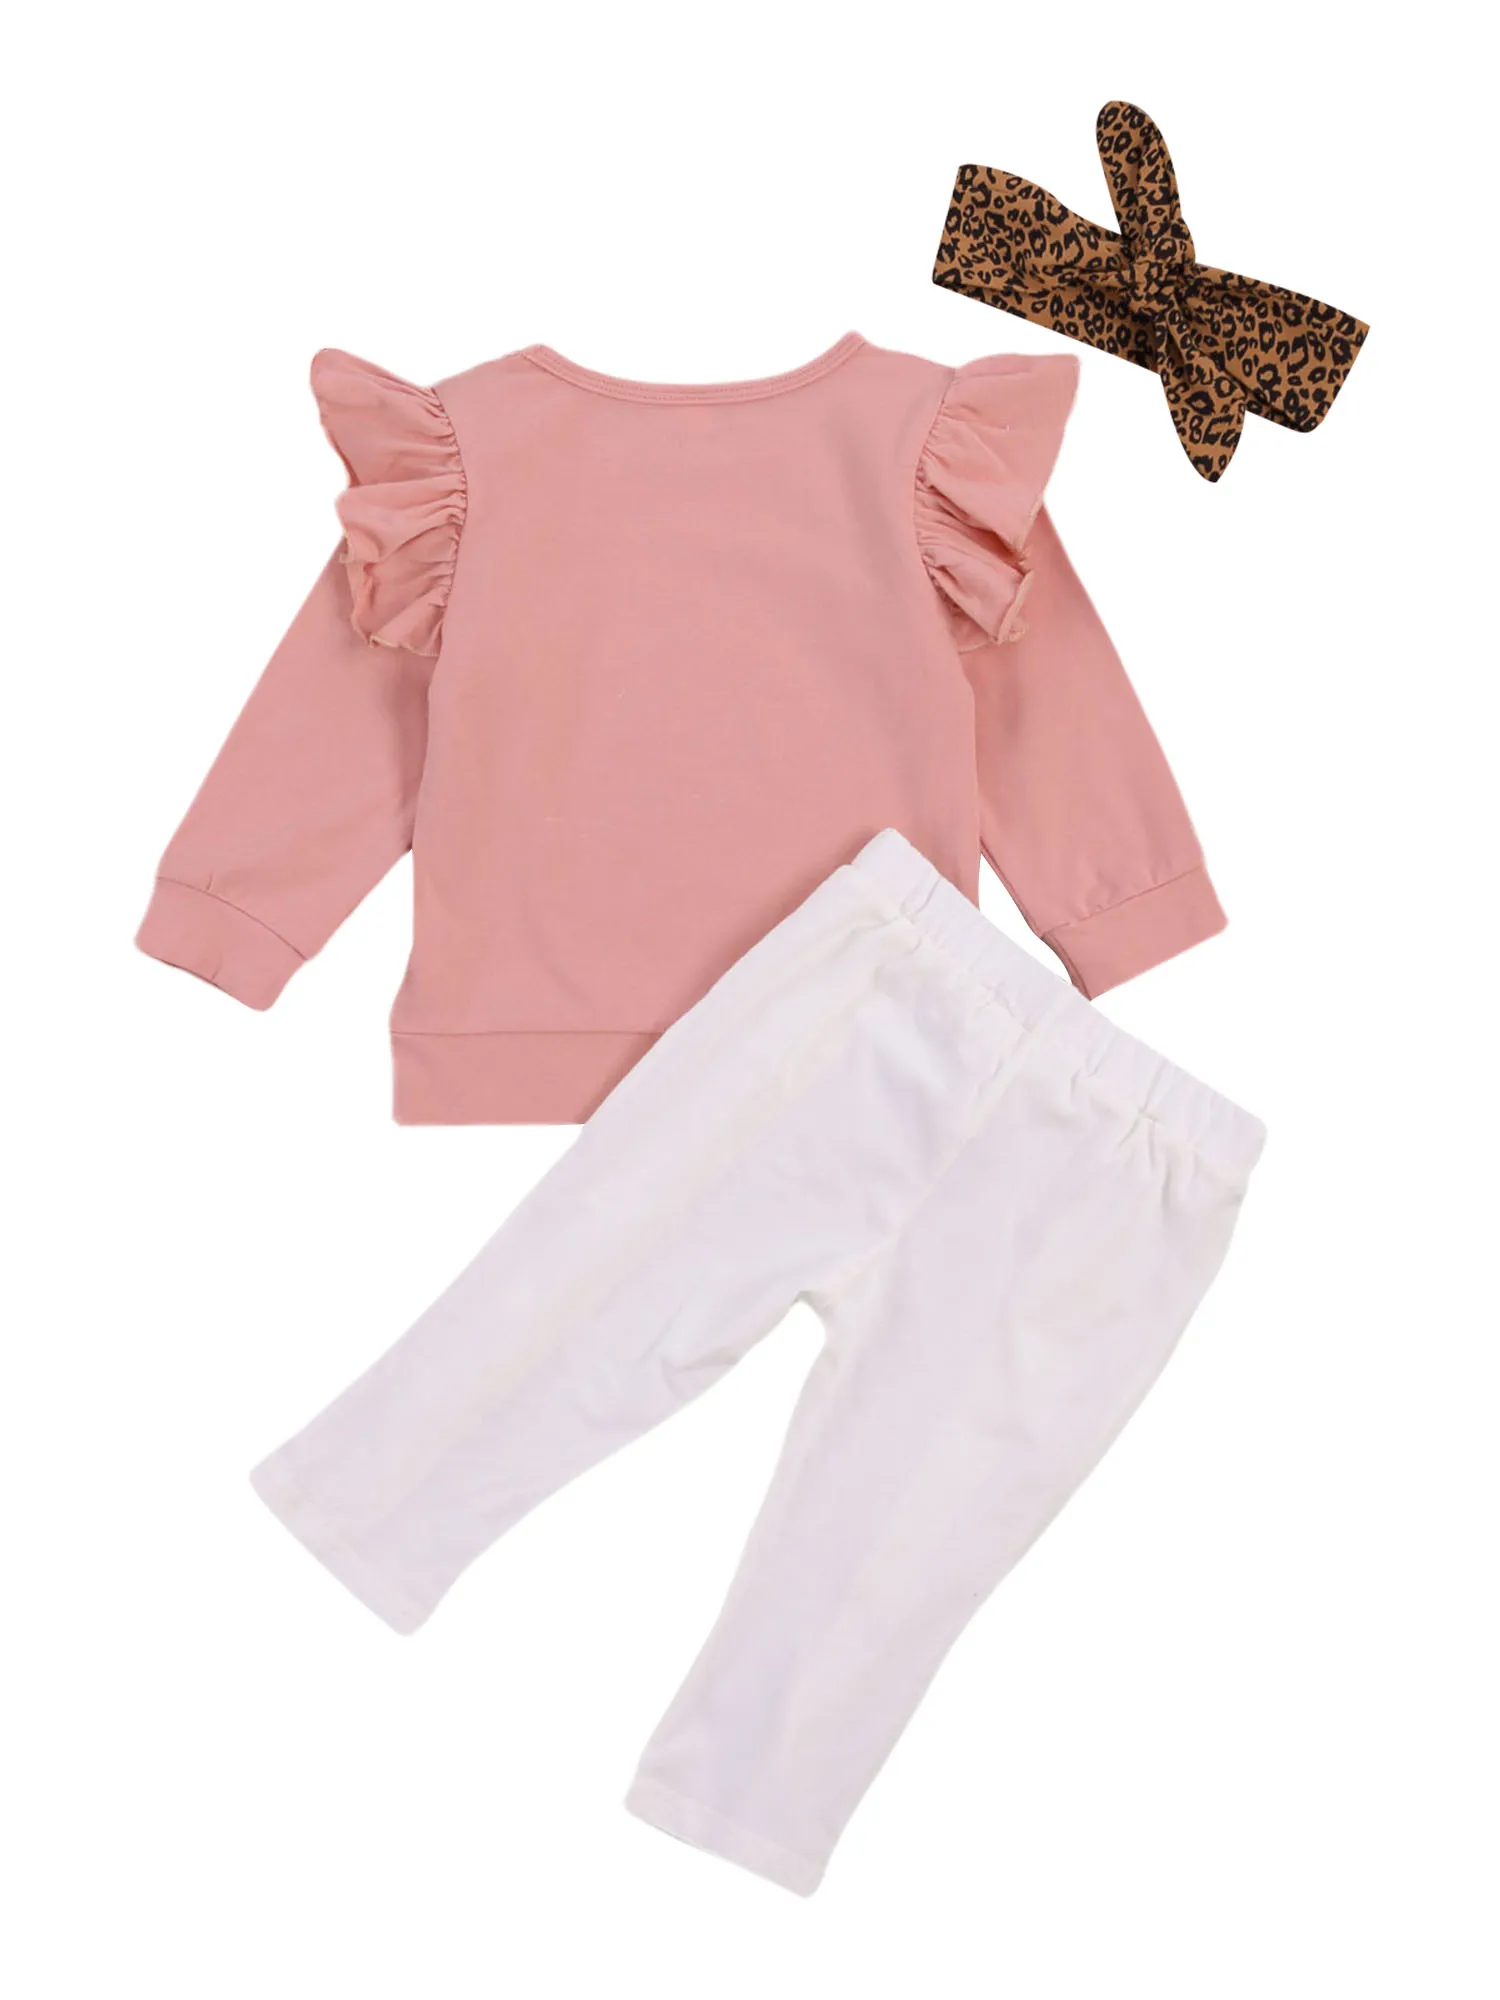 

Pudcoco 2020 Autumn 1-5Y Baby Girls 3Pcs Set Pink Ruffled Long Sleeve Top+Bow Pants+Leopard Print Headband Outfit Clothes